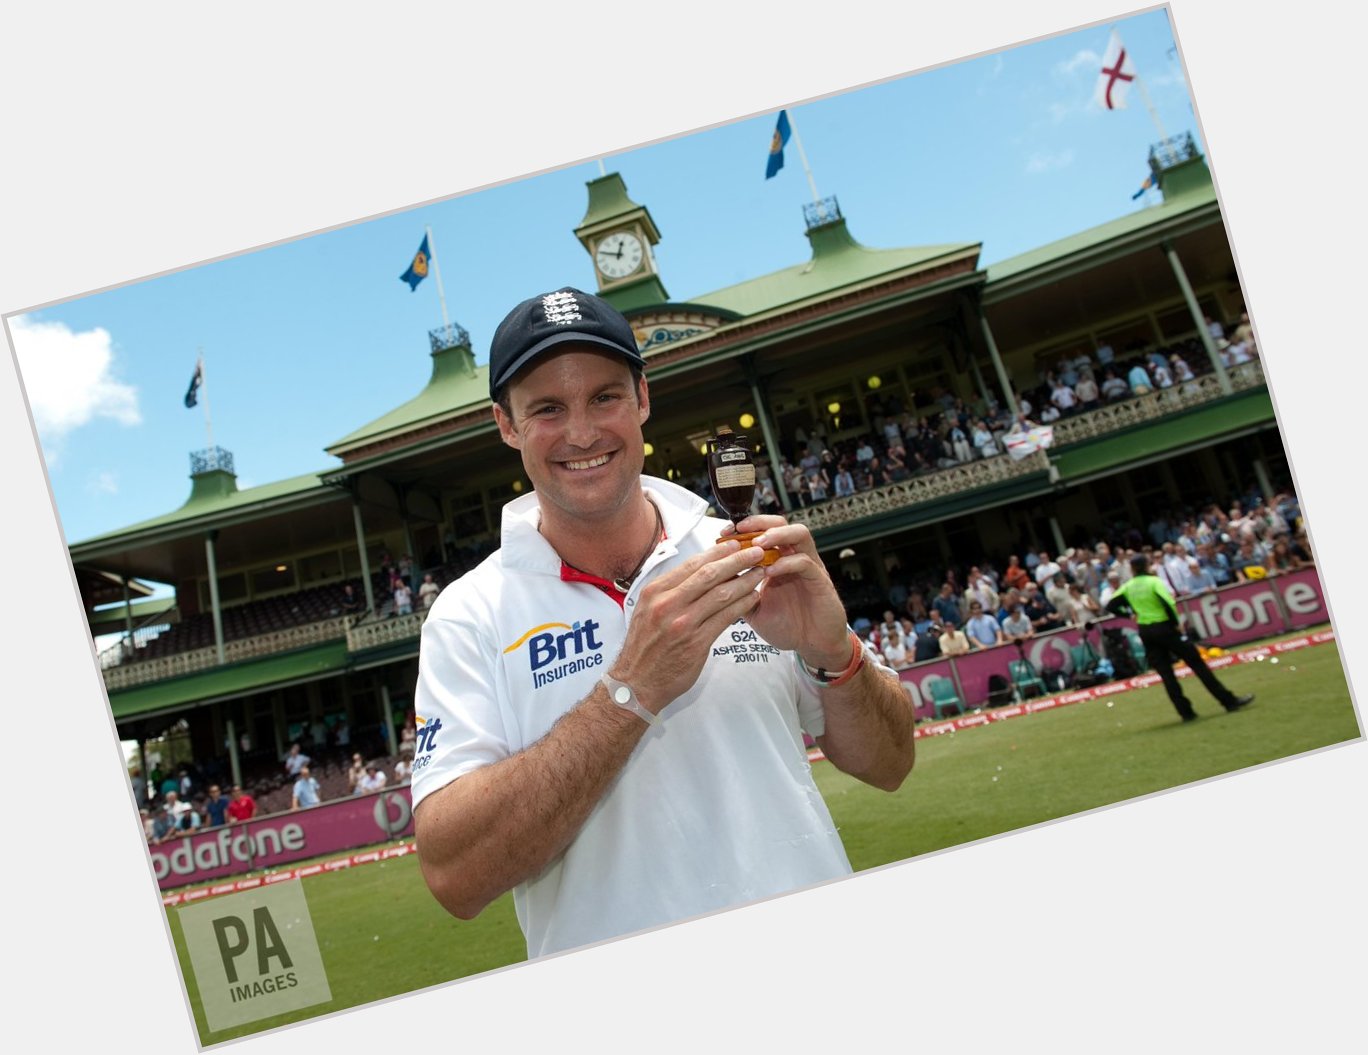   Happy Birthday to director of cricket and former Test captain Andrew Strauss 4  0  today!   